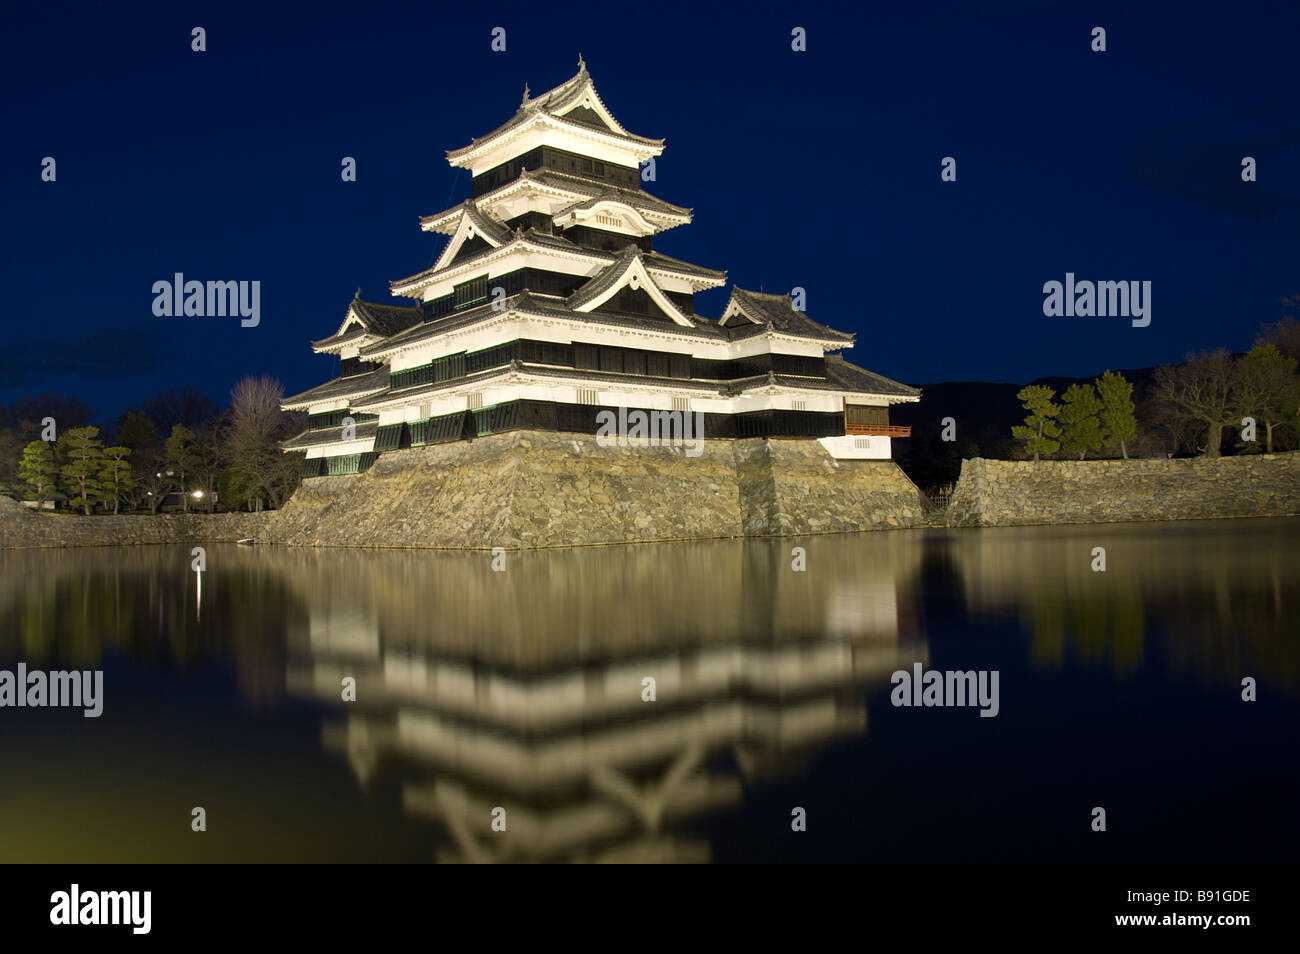 Matsumoto castle by night against a blue sky Stock Photo